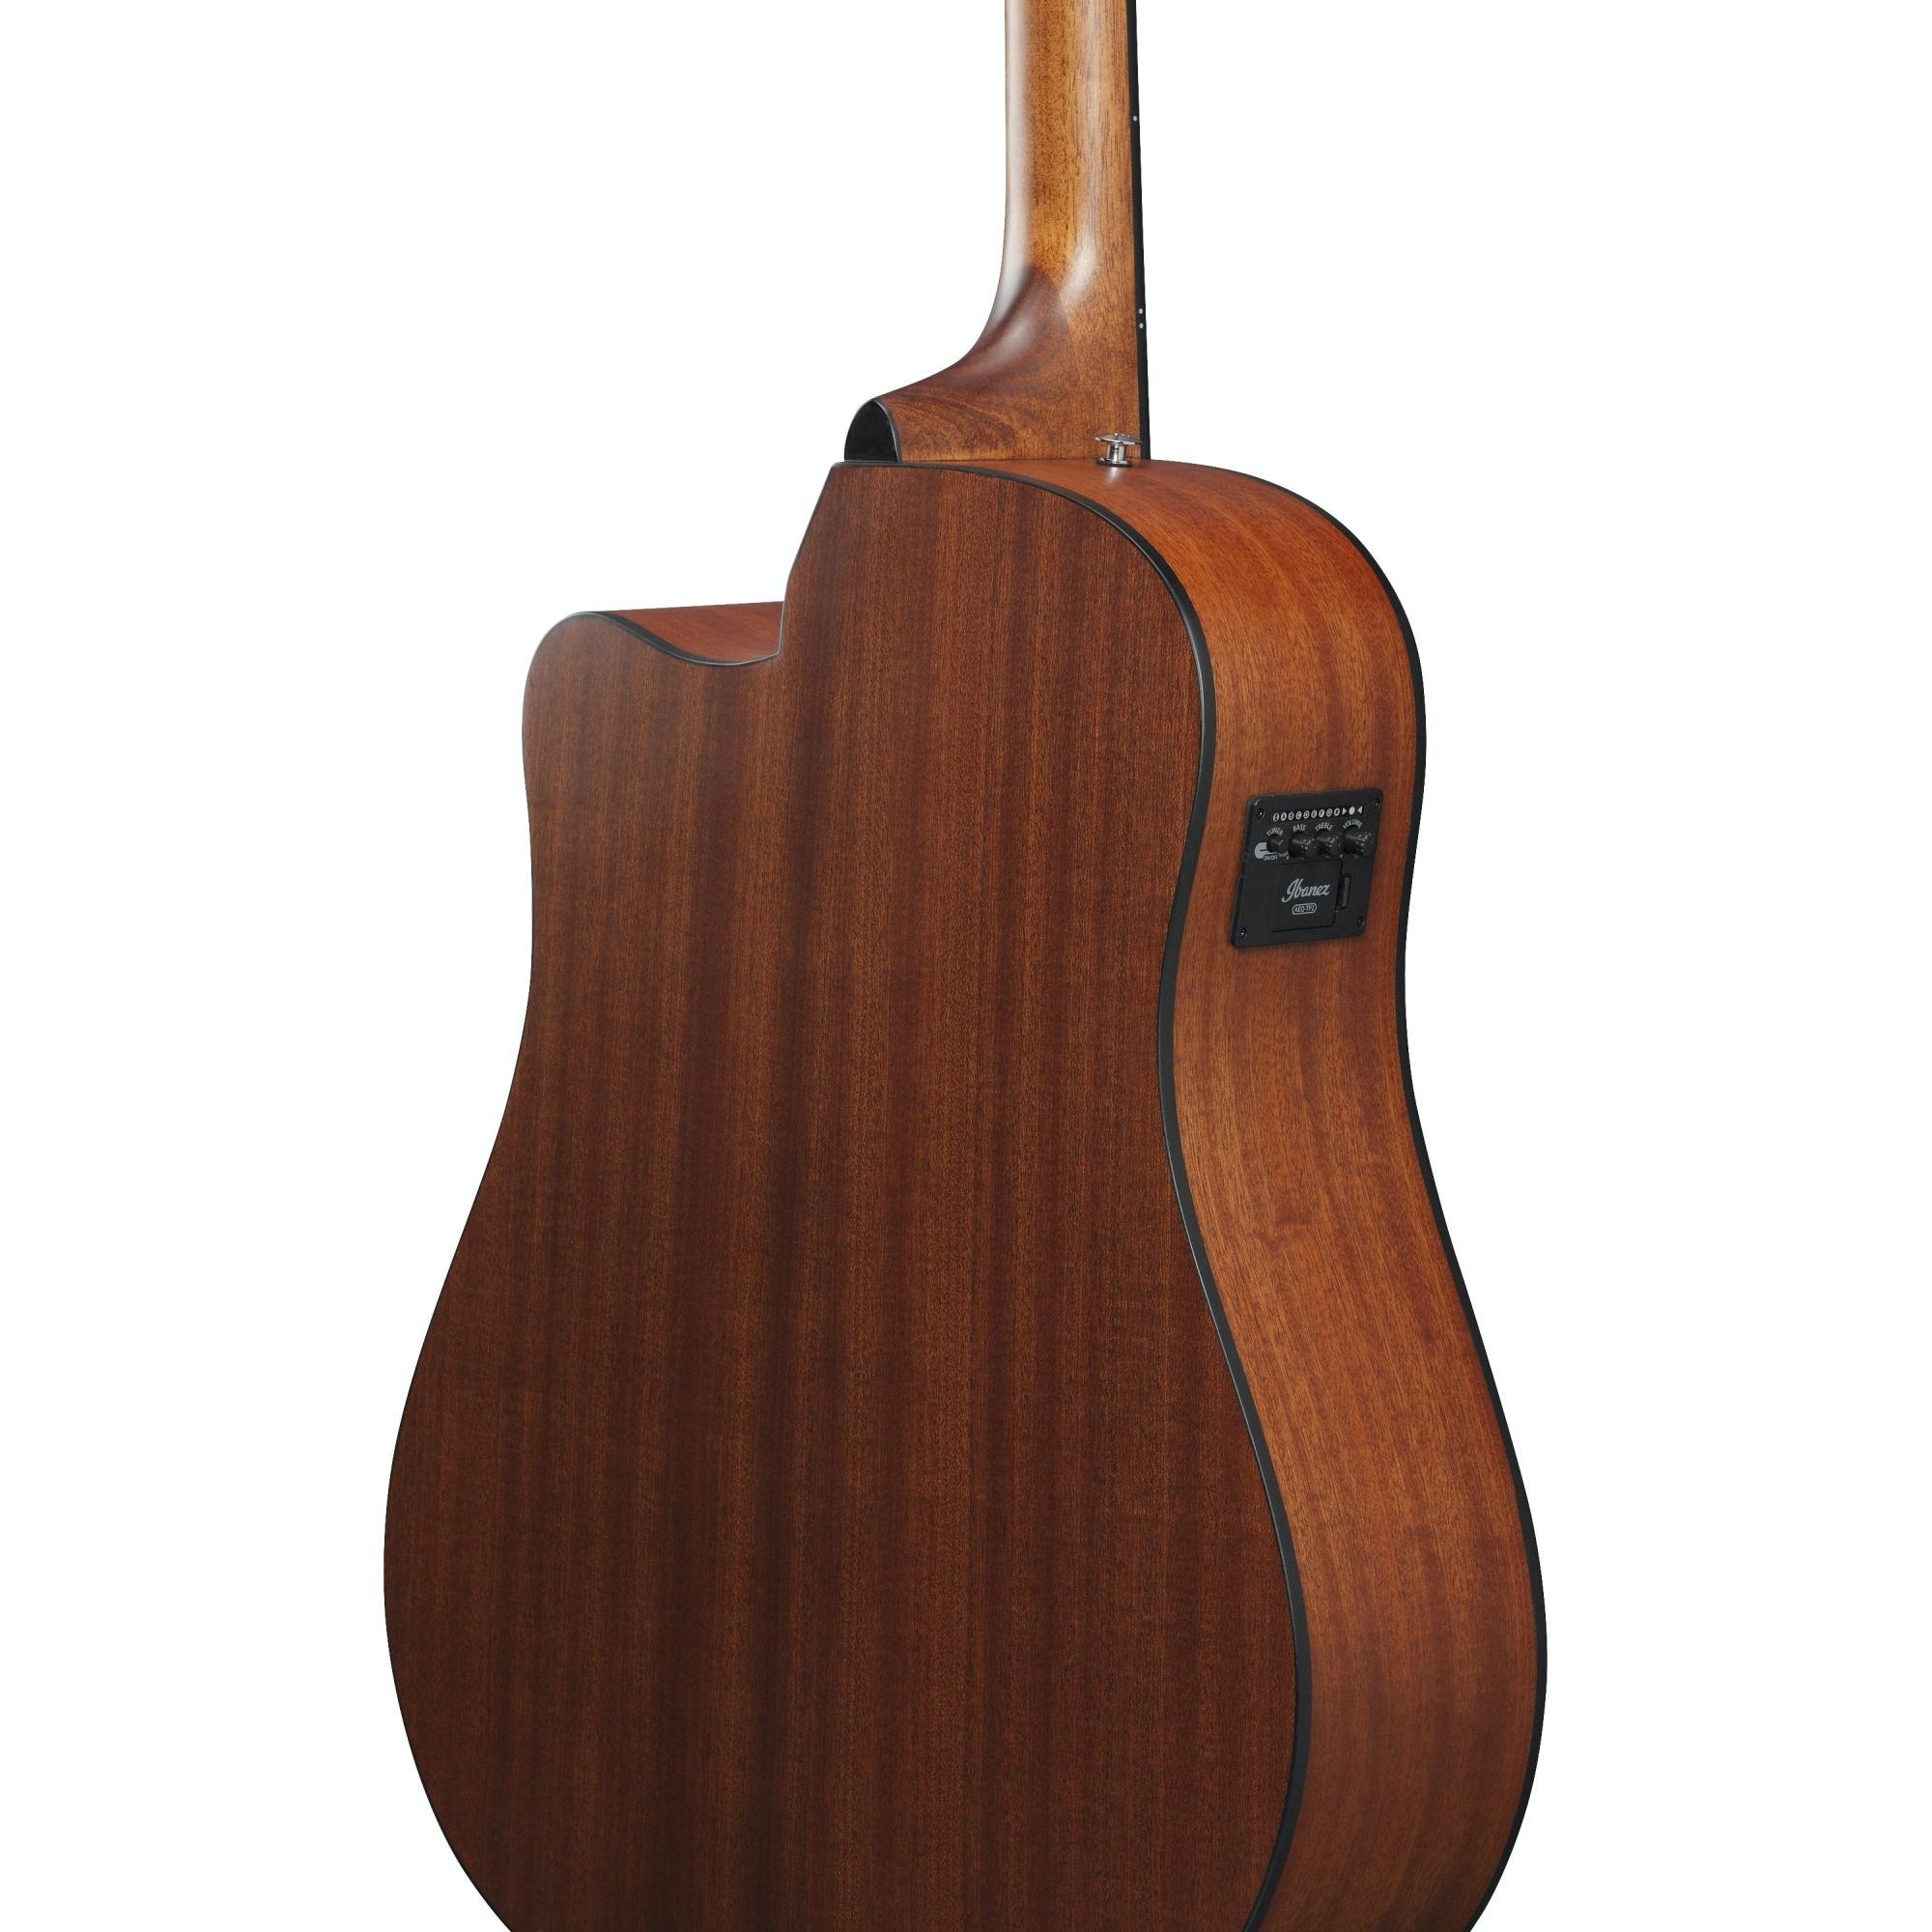 Ibanez AAD50CE Advanced Acoustic-electric Guitar - Natural Online price in India